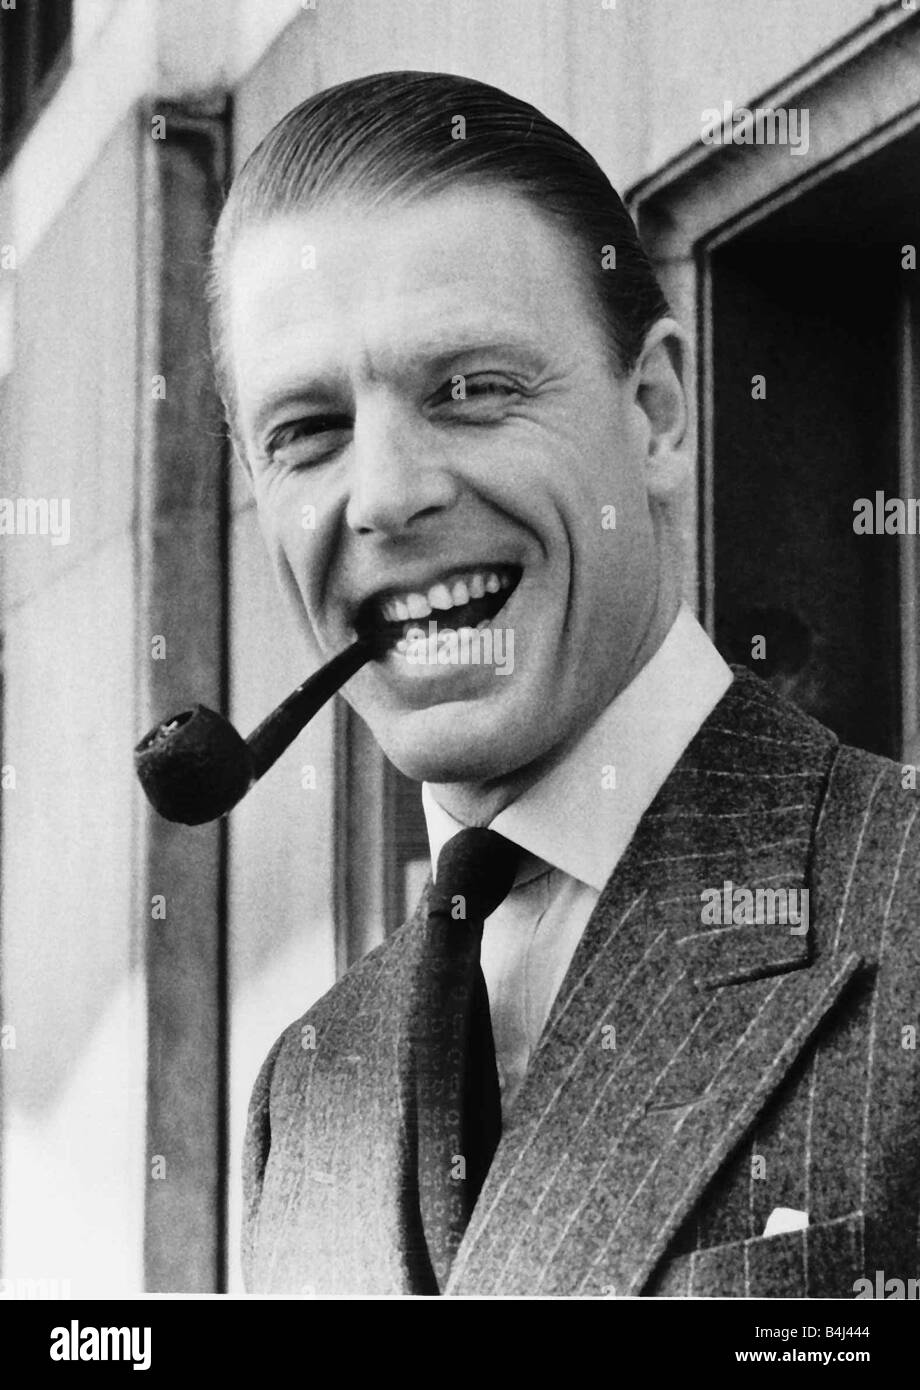 Edward Fox Actor after being made Pipeman of the Year Award January 1980 Dbase MSI Stock Photo